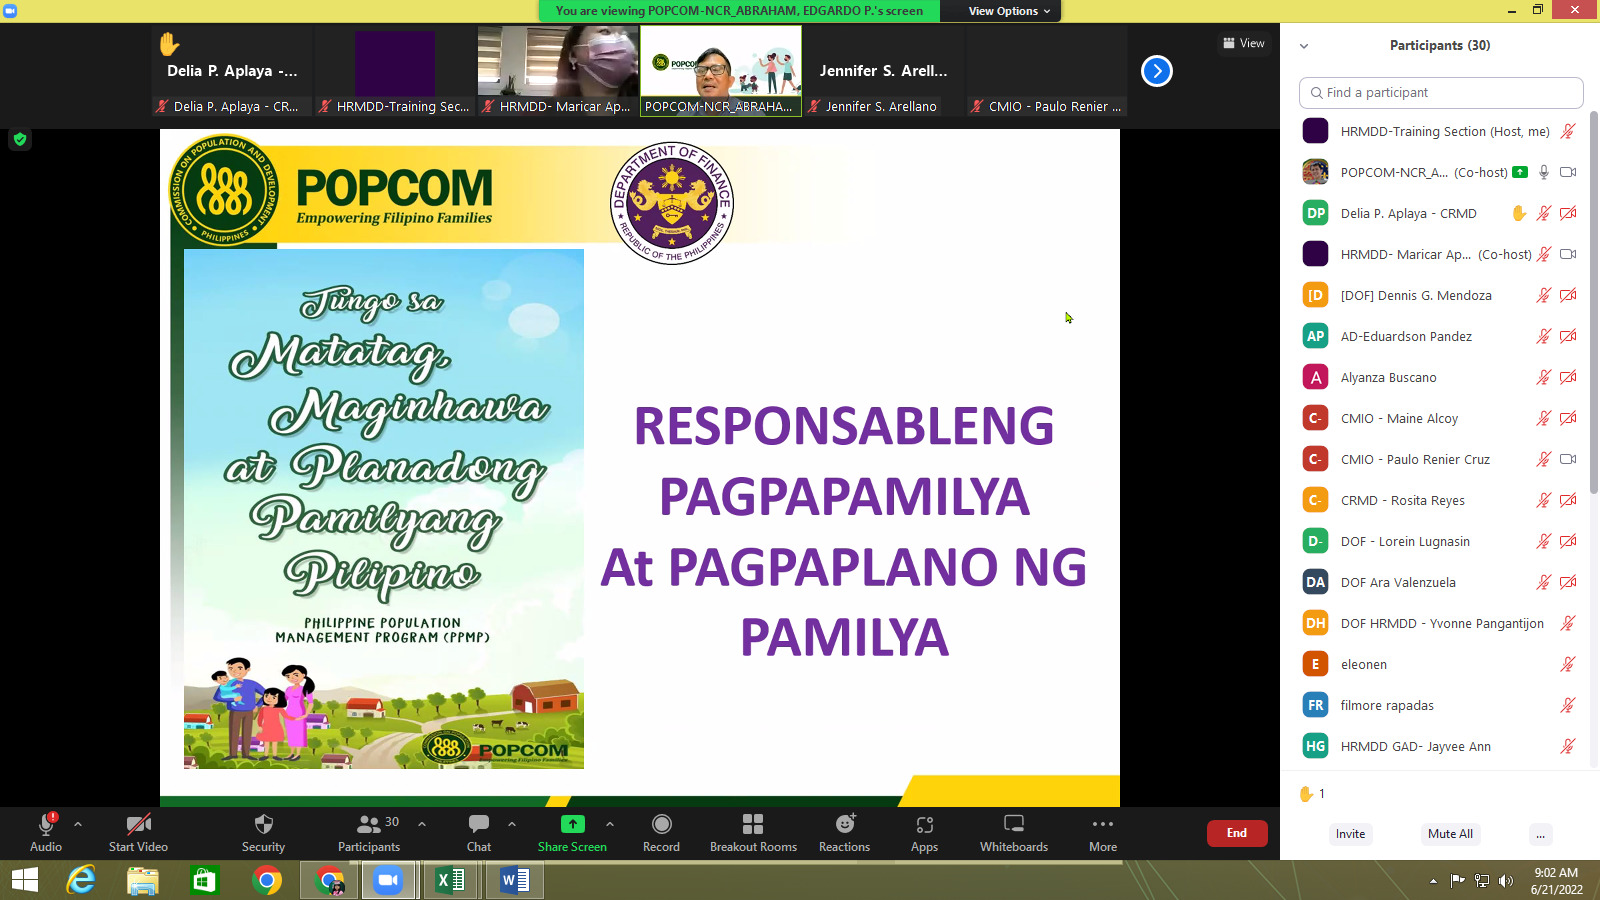 Webinar on Responsible Parenthood and Family Planning